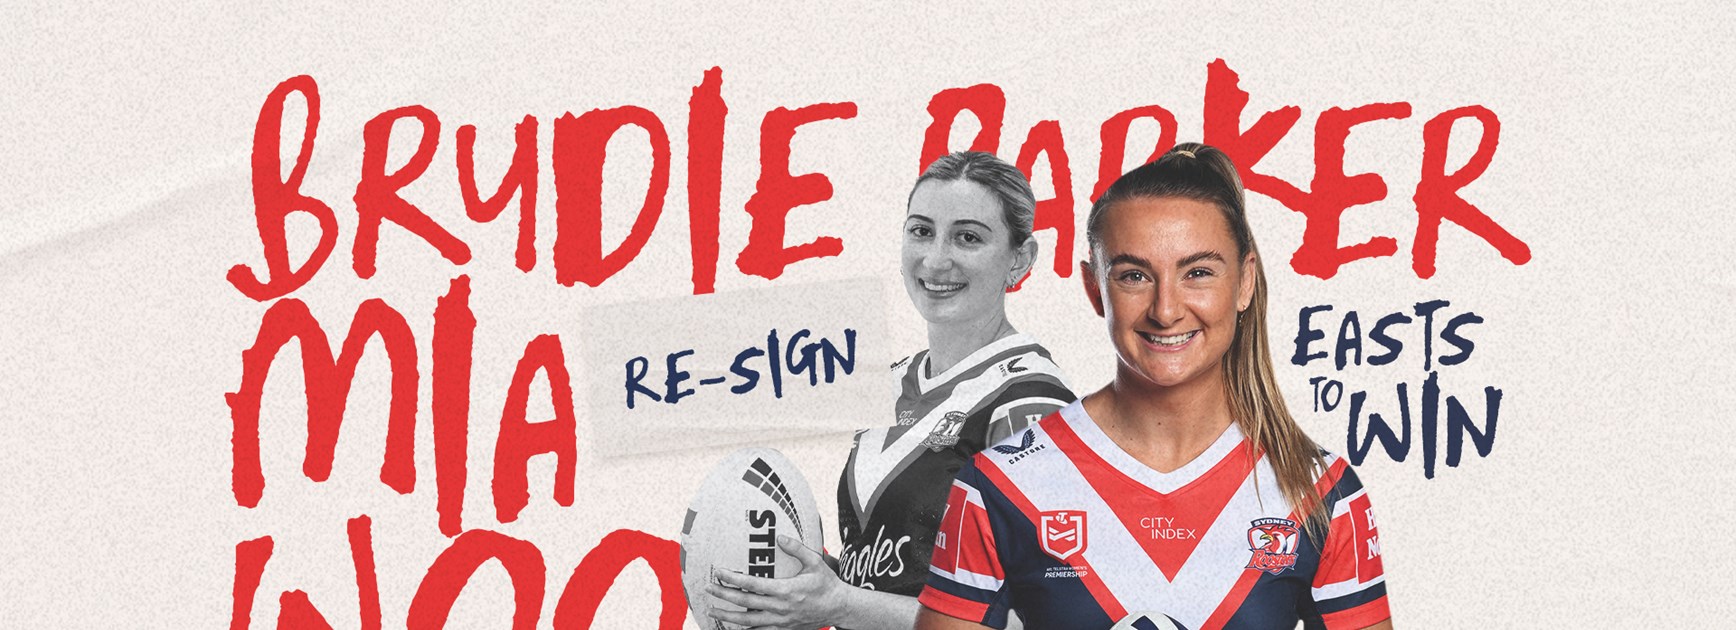 Brydie Parker & Mia Wood Extend as NRLW Squad Continues to Build